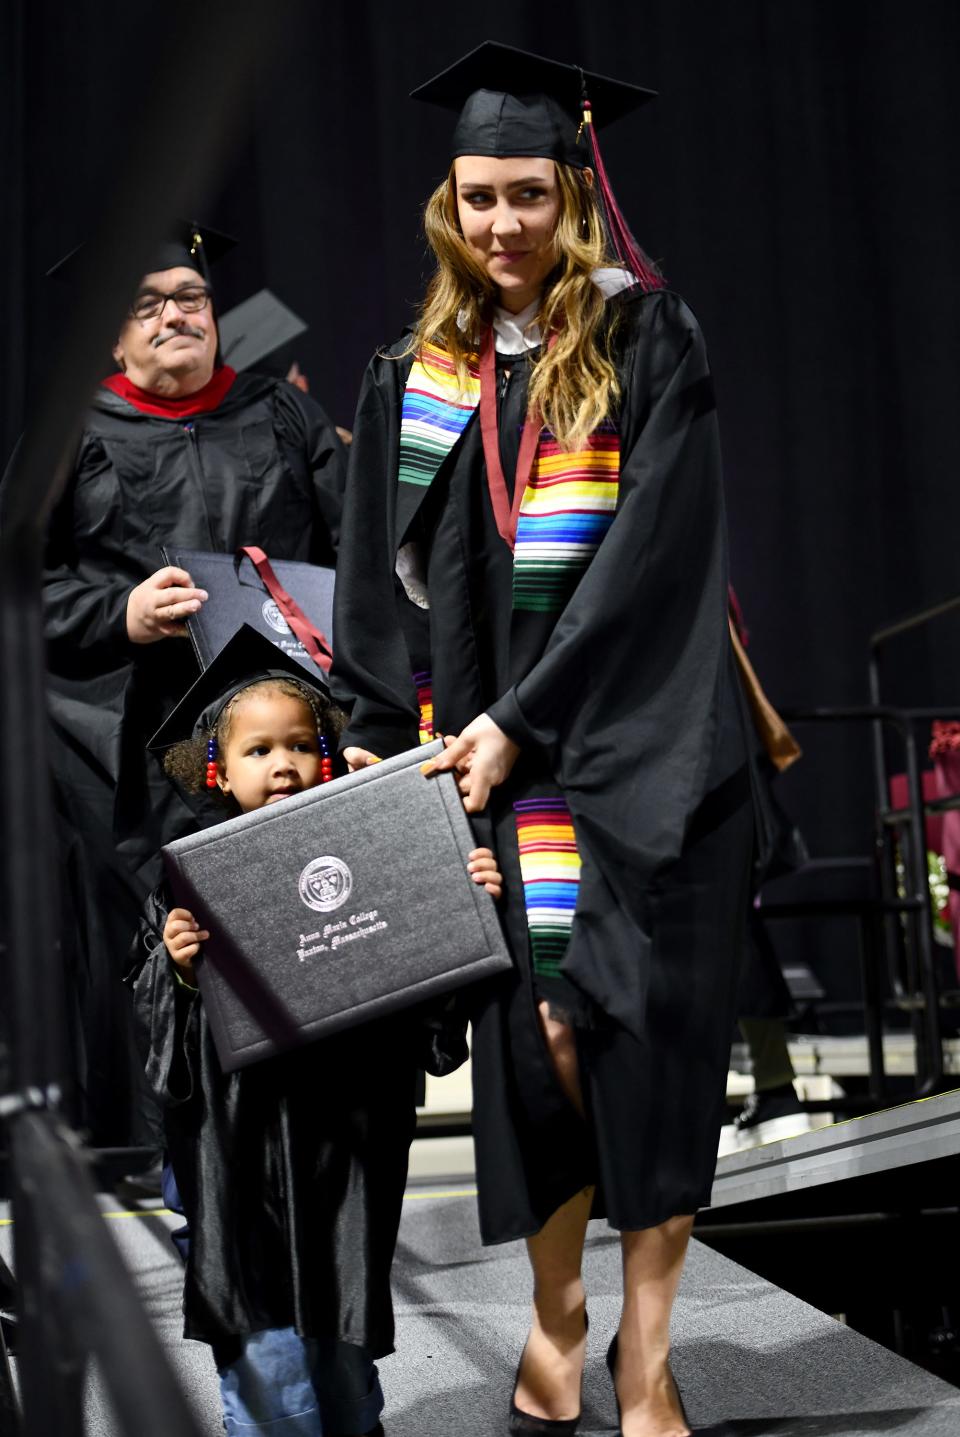 Mariah Vega of Worcester allows her daughter, Aliana Vega-Walker, 3, to help carry her master of arts in counseling psychology diploma during Anna Maria College's 74th commencement exercises at the DCU Center Monday.